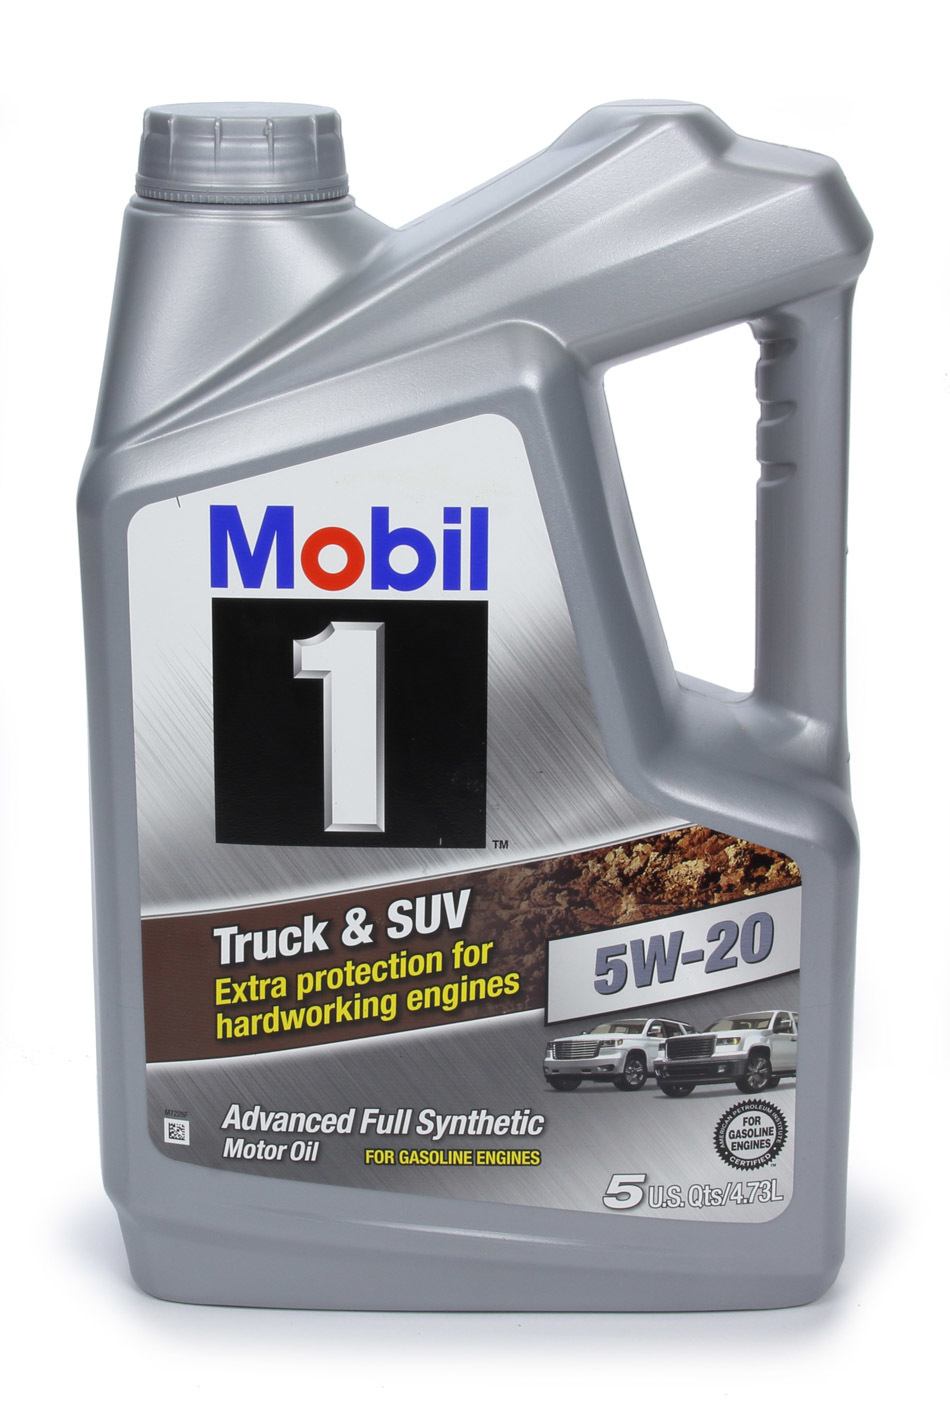 MOBIL 1 Motor Oil Truck and SUV 5W20 Synthetic 5 qt Jug Each